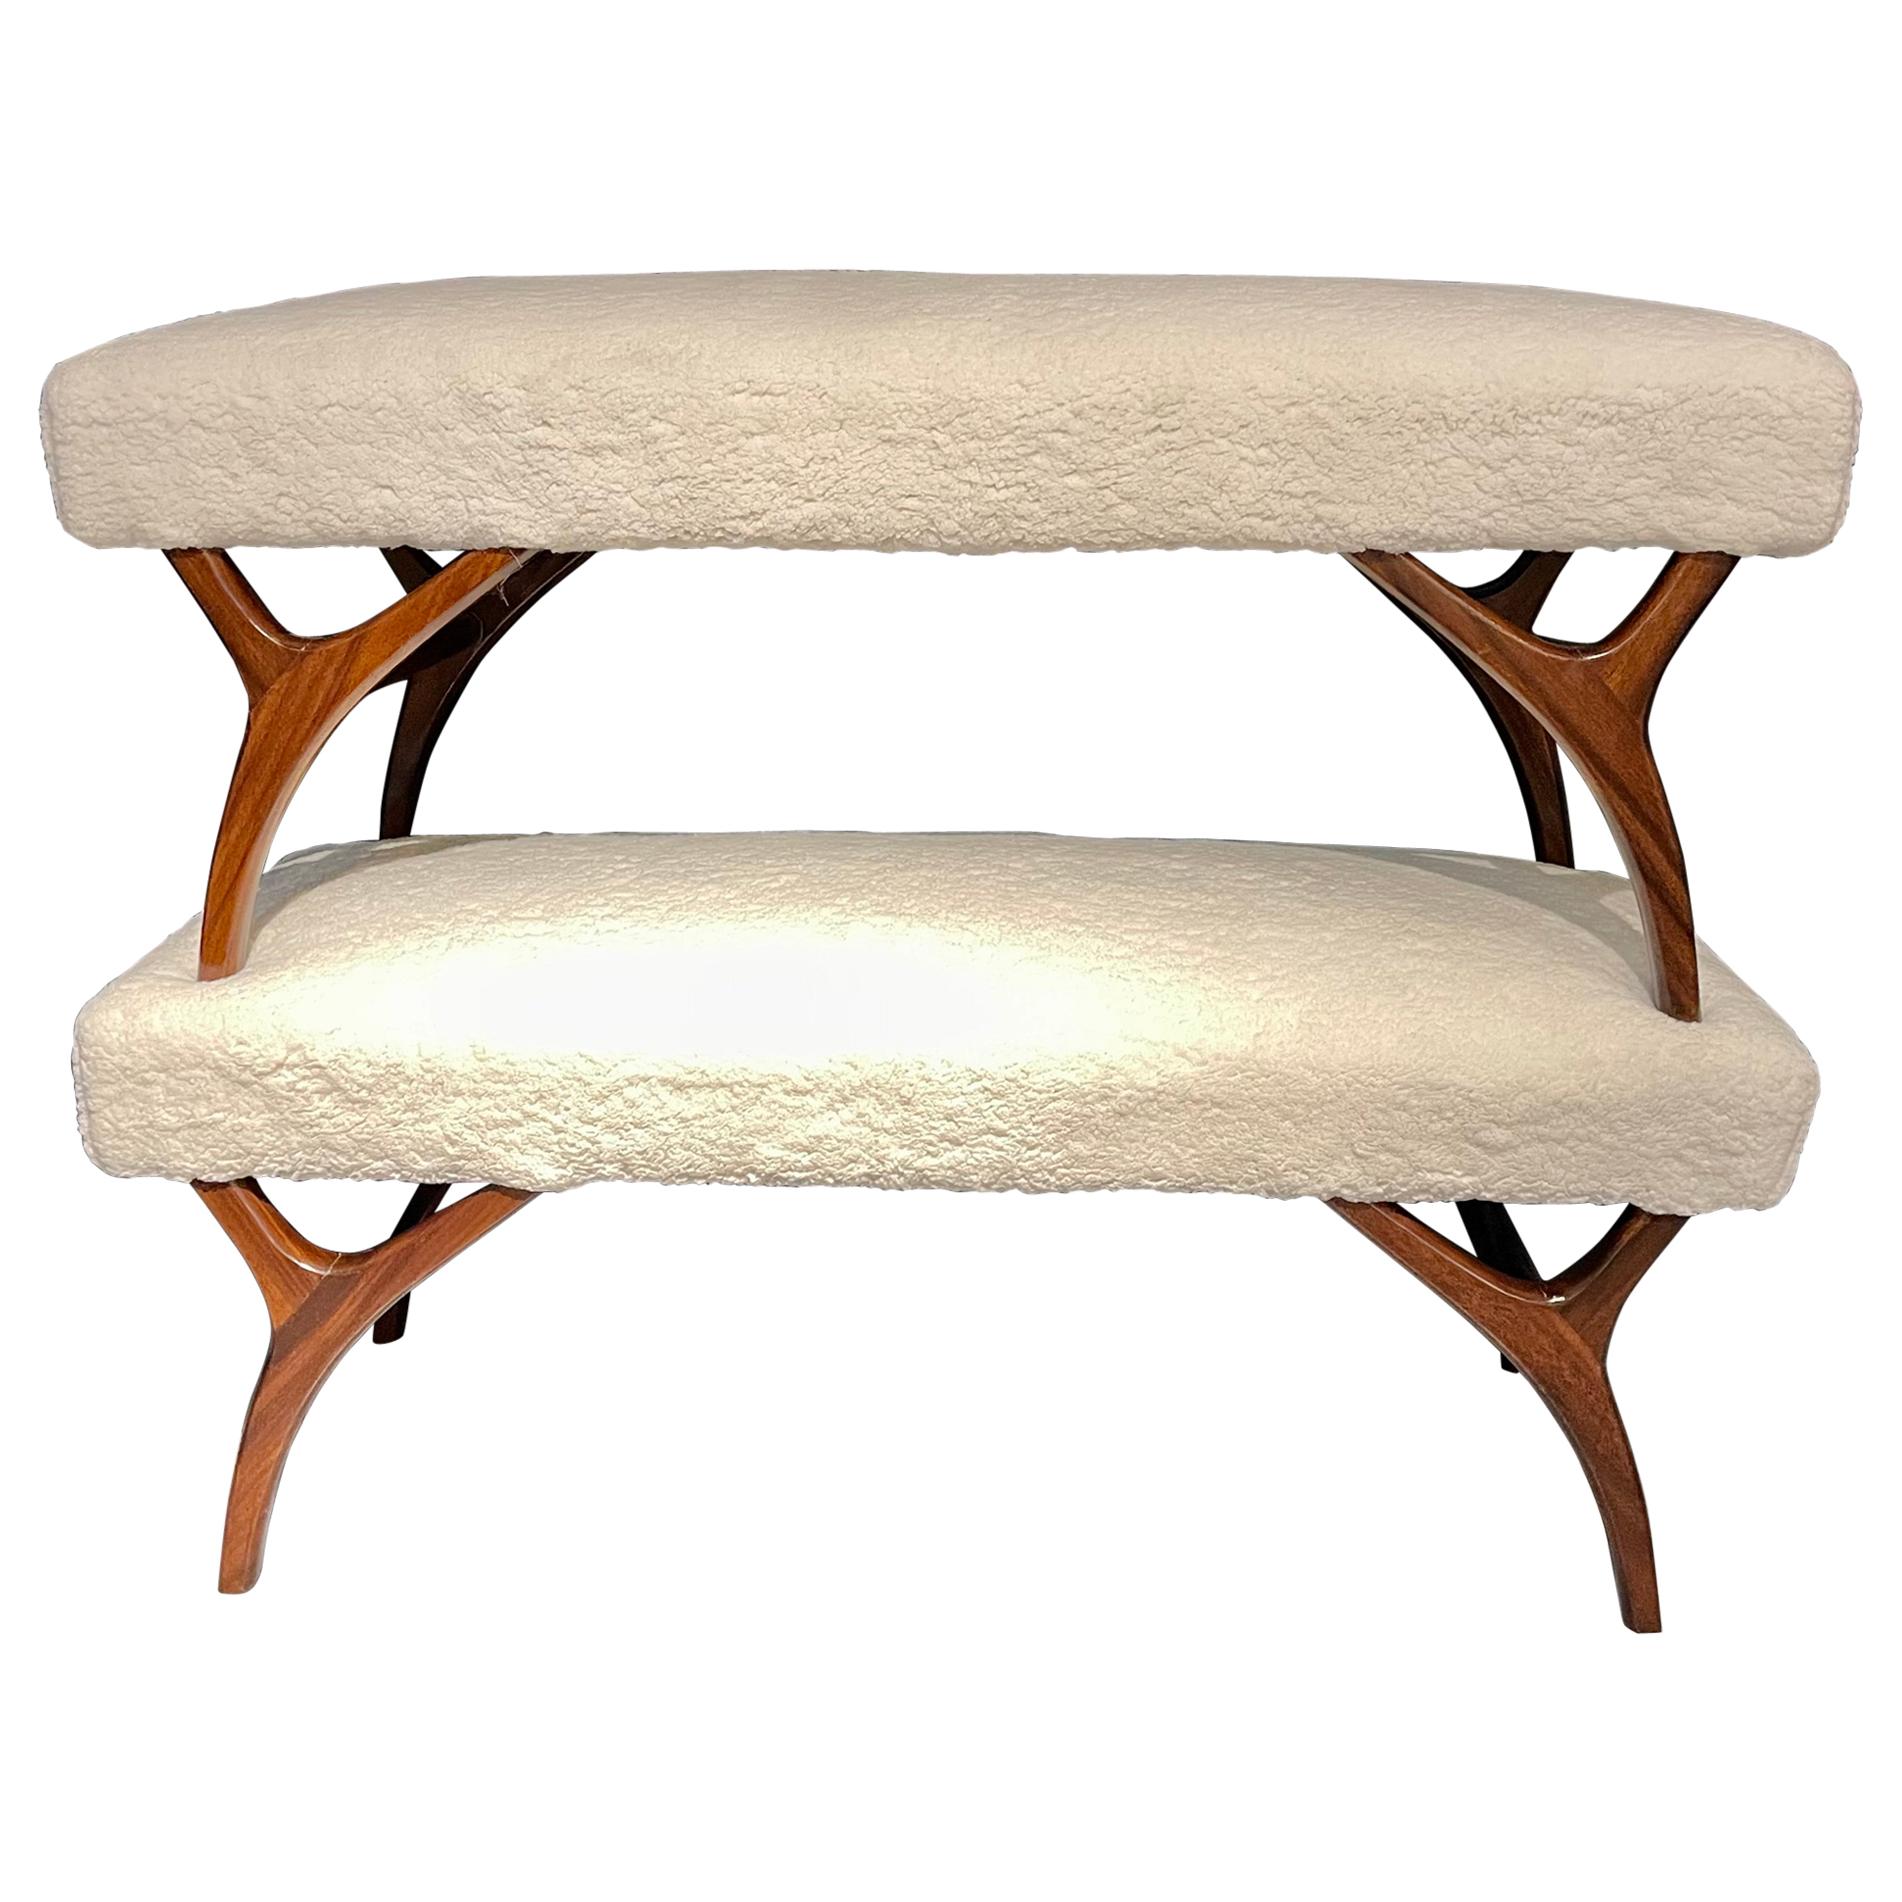 Mid-Century Modern Pair of Window Benches or Stools in Sherpa Upholstery